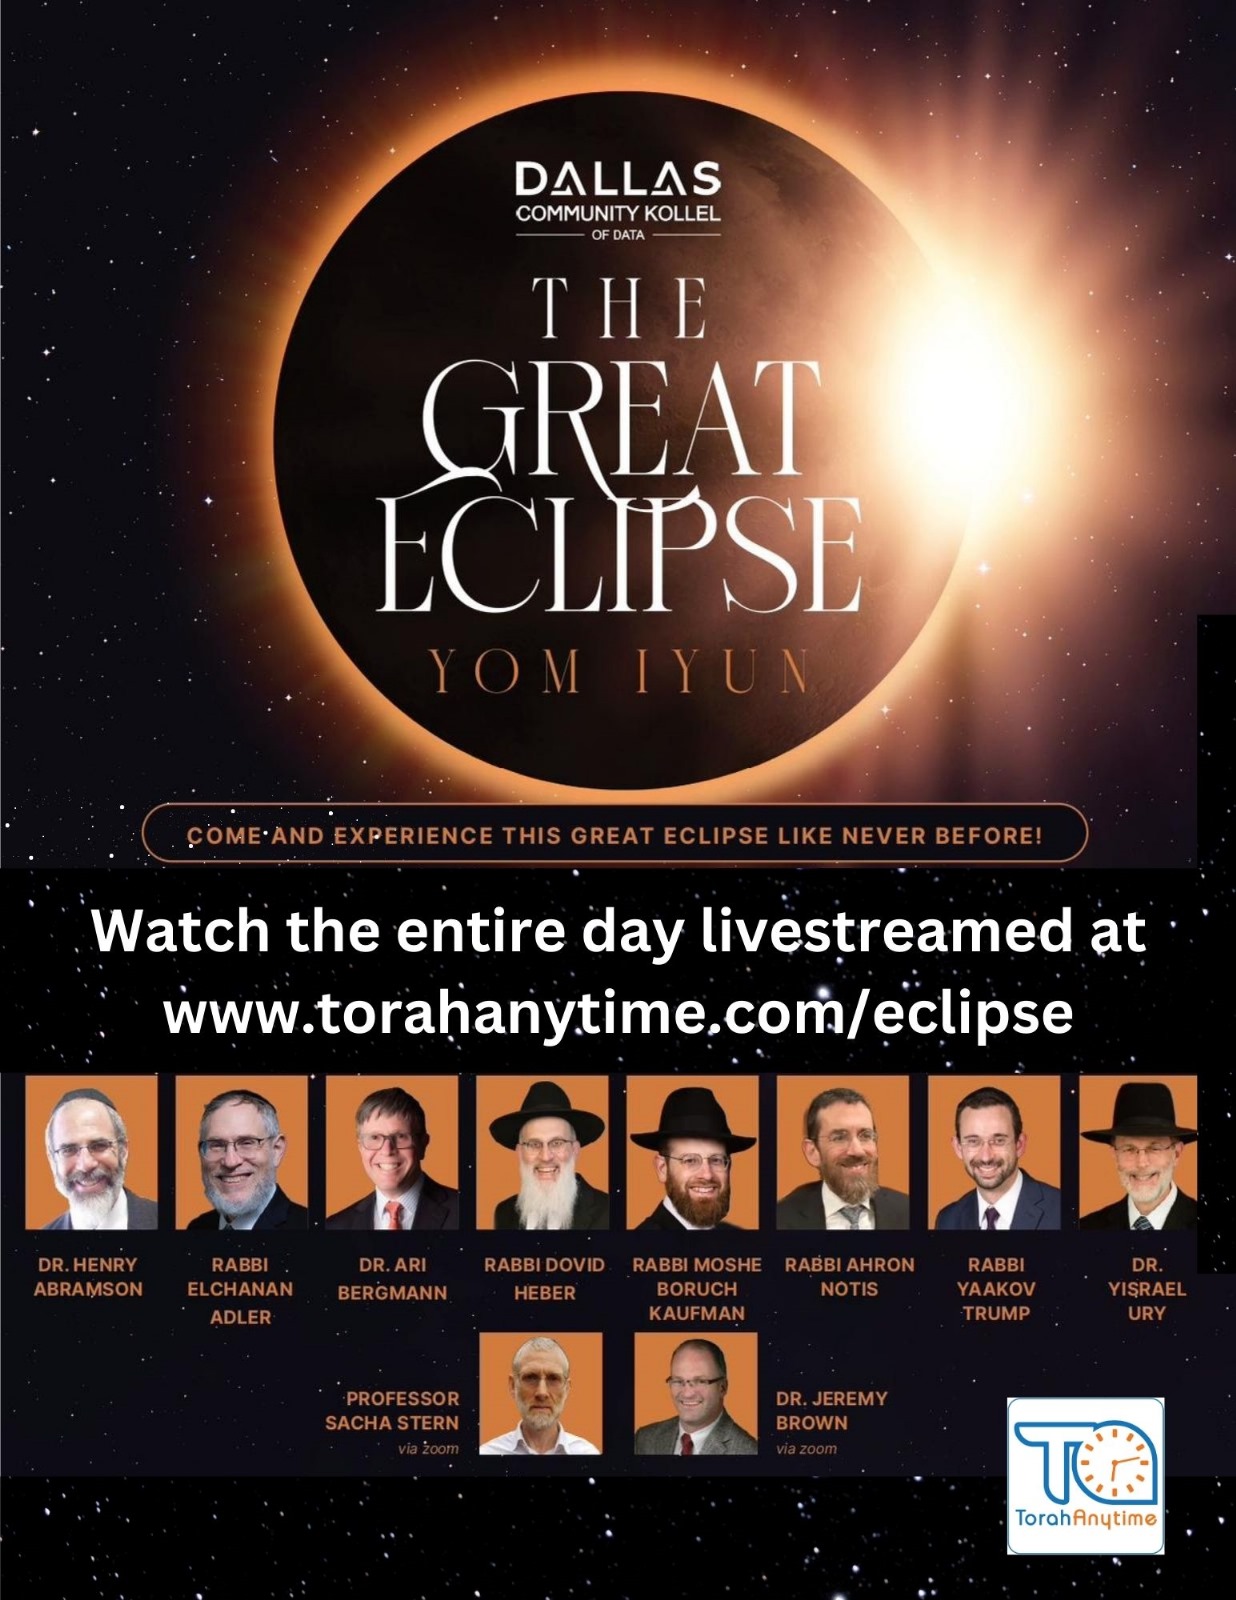 Dallas Community Kollel: The Great Eclipse Yom Iyun (Also live-streamed at TorahAnytime) 1